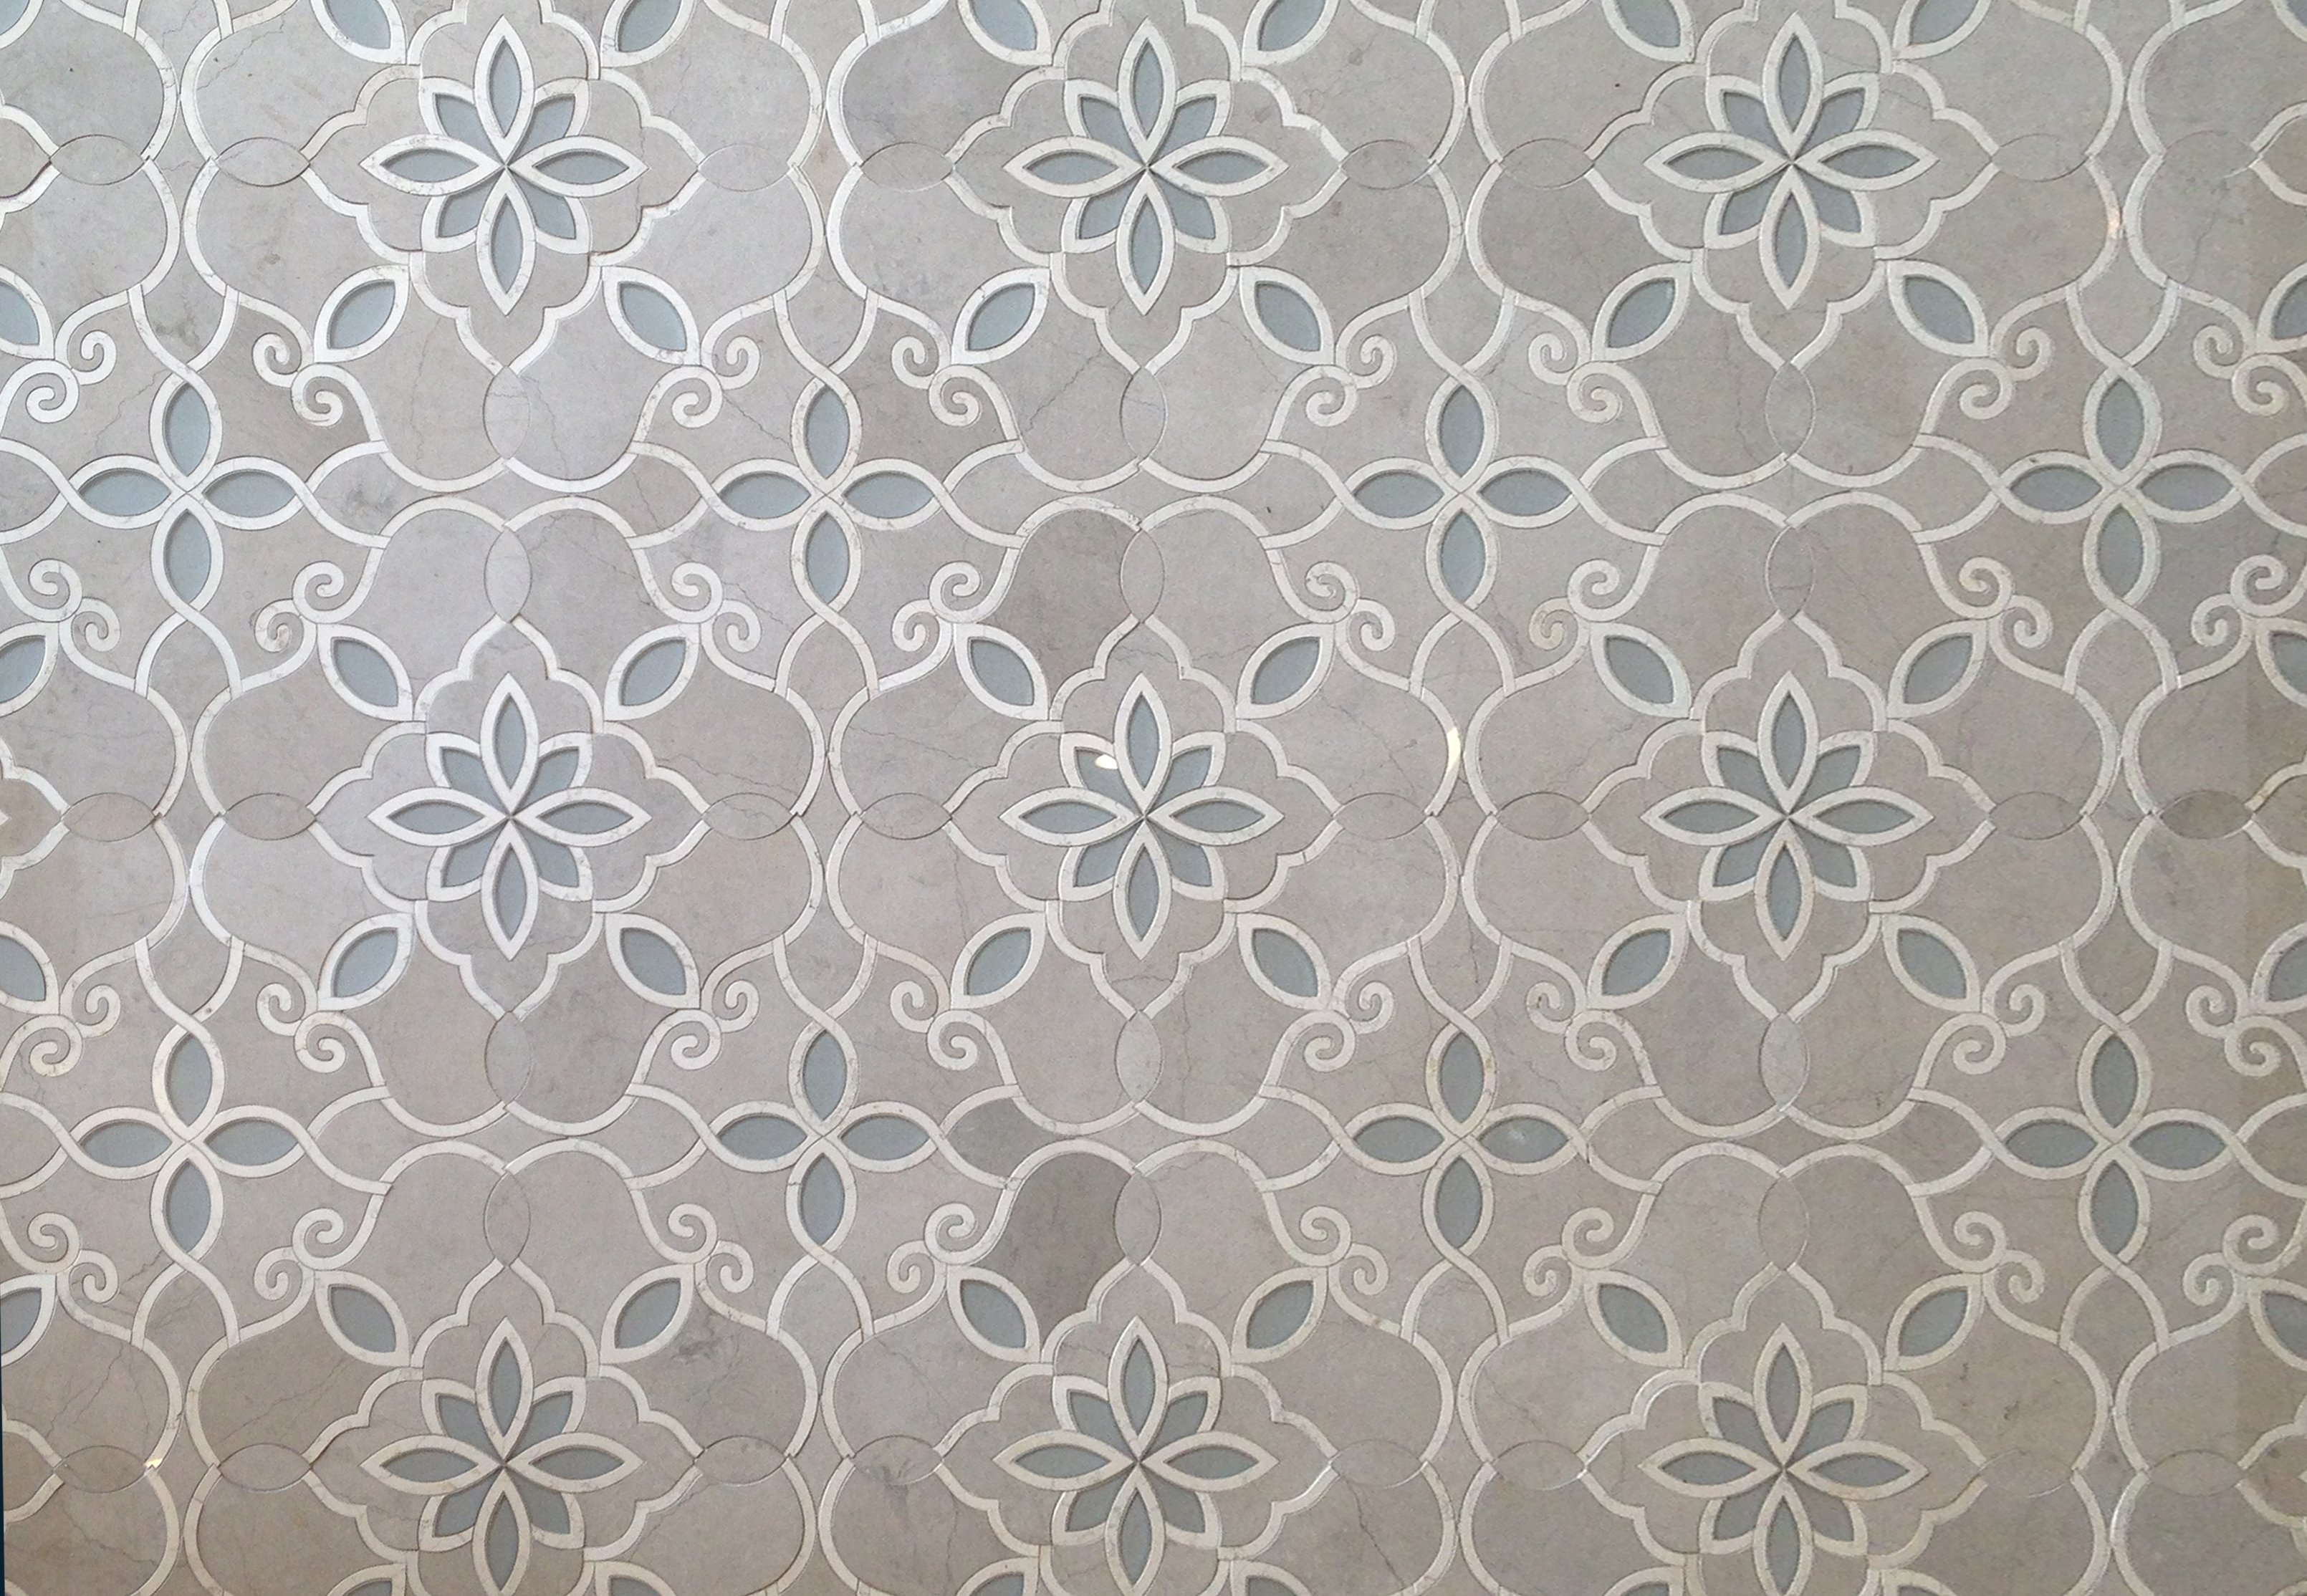 A unique Artistic Tile pattern is a great way to put your own spin on a traditional surface.